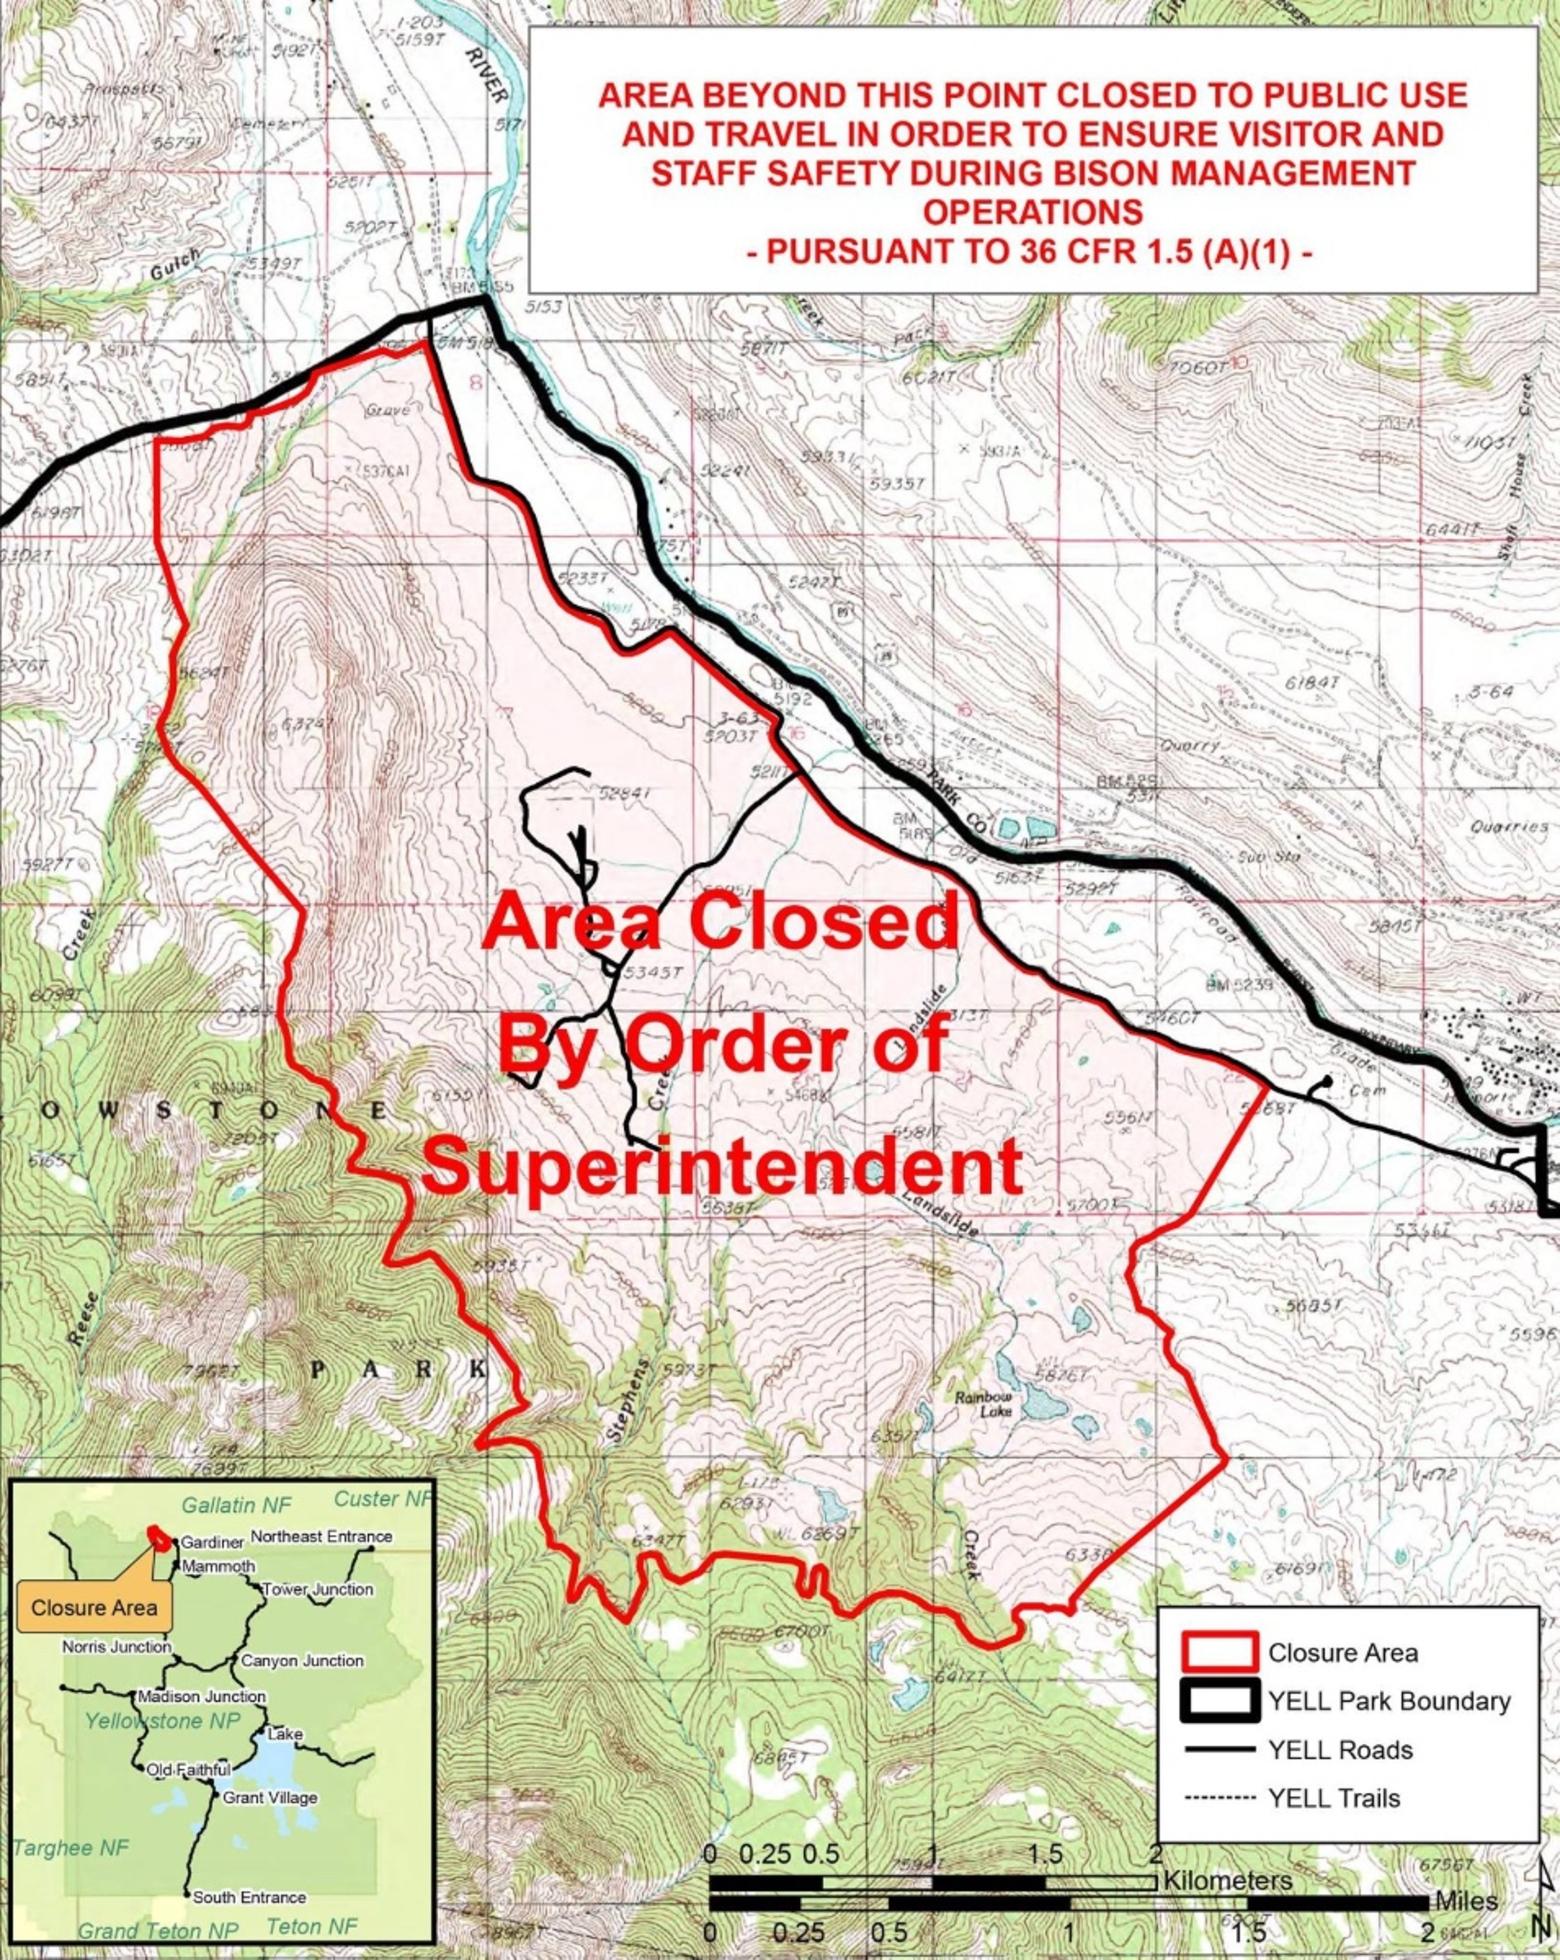 In response to a criminal investigation focussed on the illegal release of bison, Yellowstone Supt. Dan Wenk declared that an area around Stephens Creek along the park's northern border is now closed to public access.